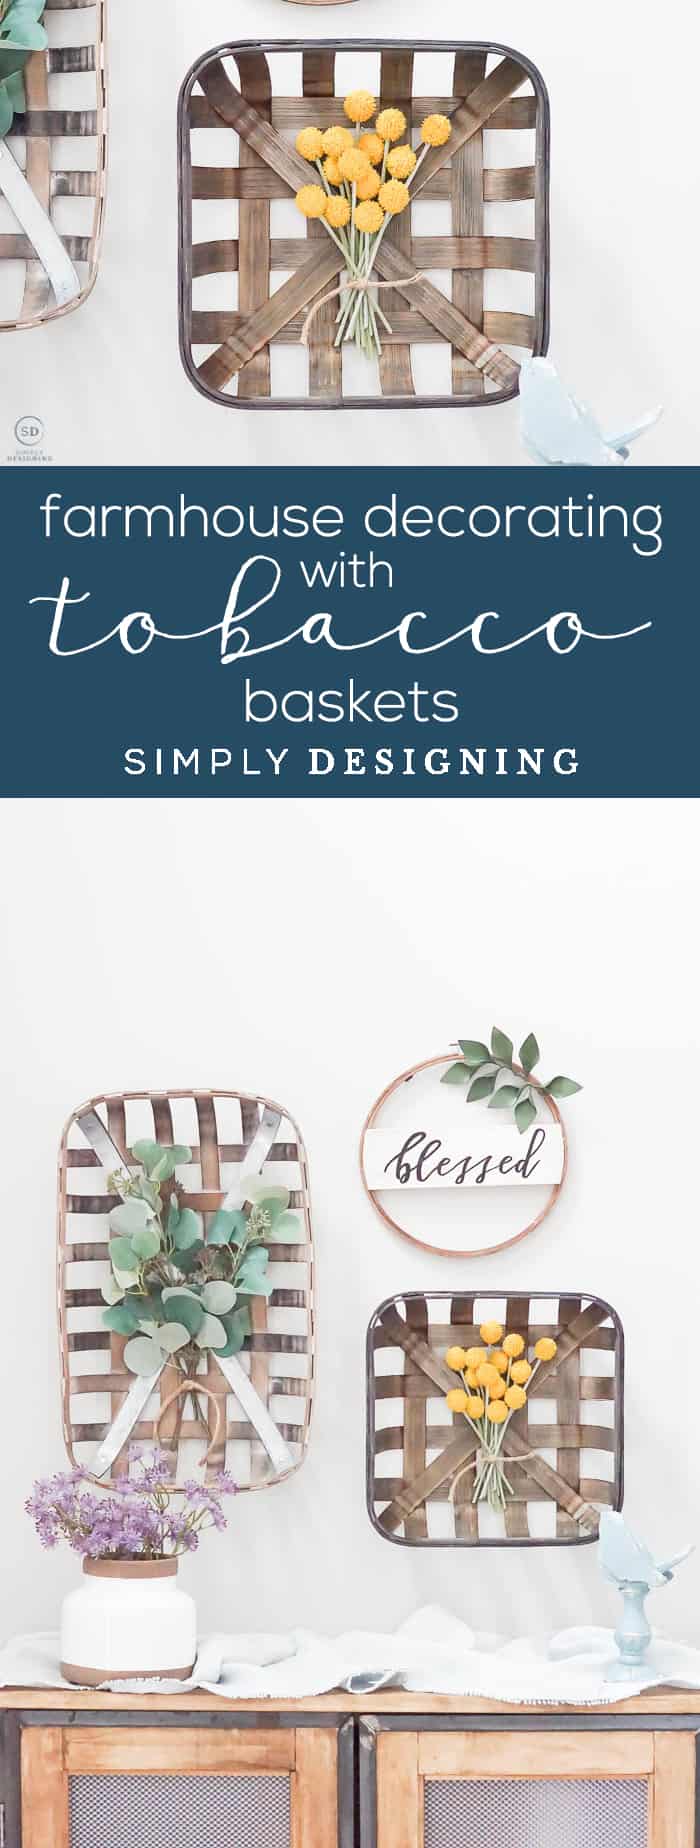 Farmhouse Decorating with Tobacco Baskets - decorate your entryway with these beautiful tobacco baskets